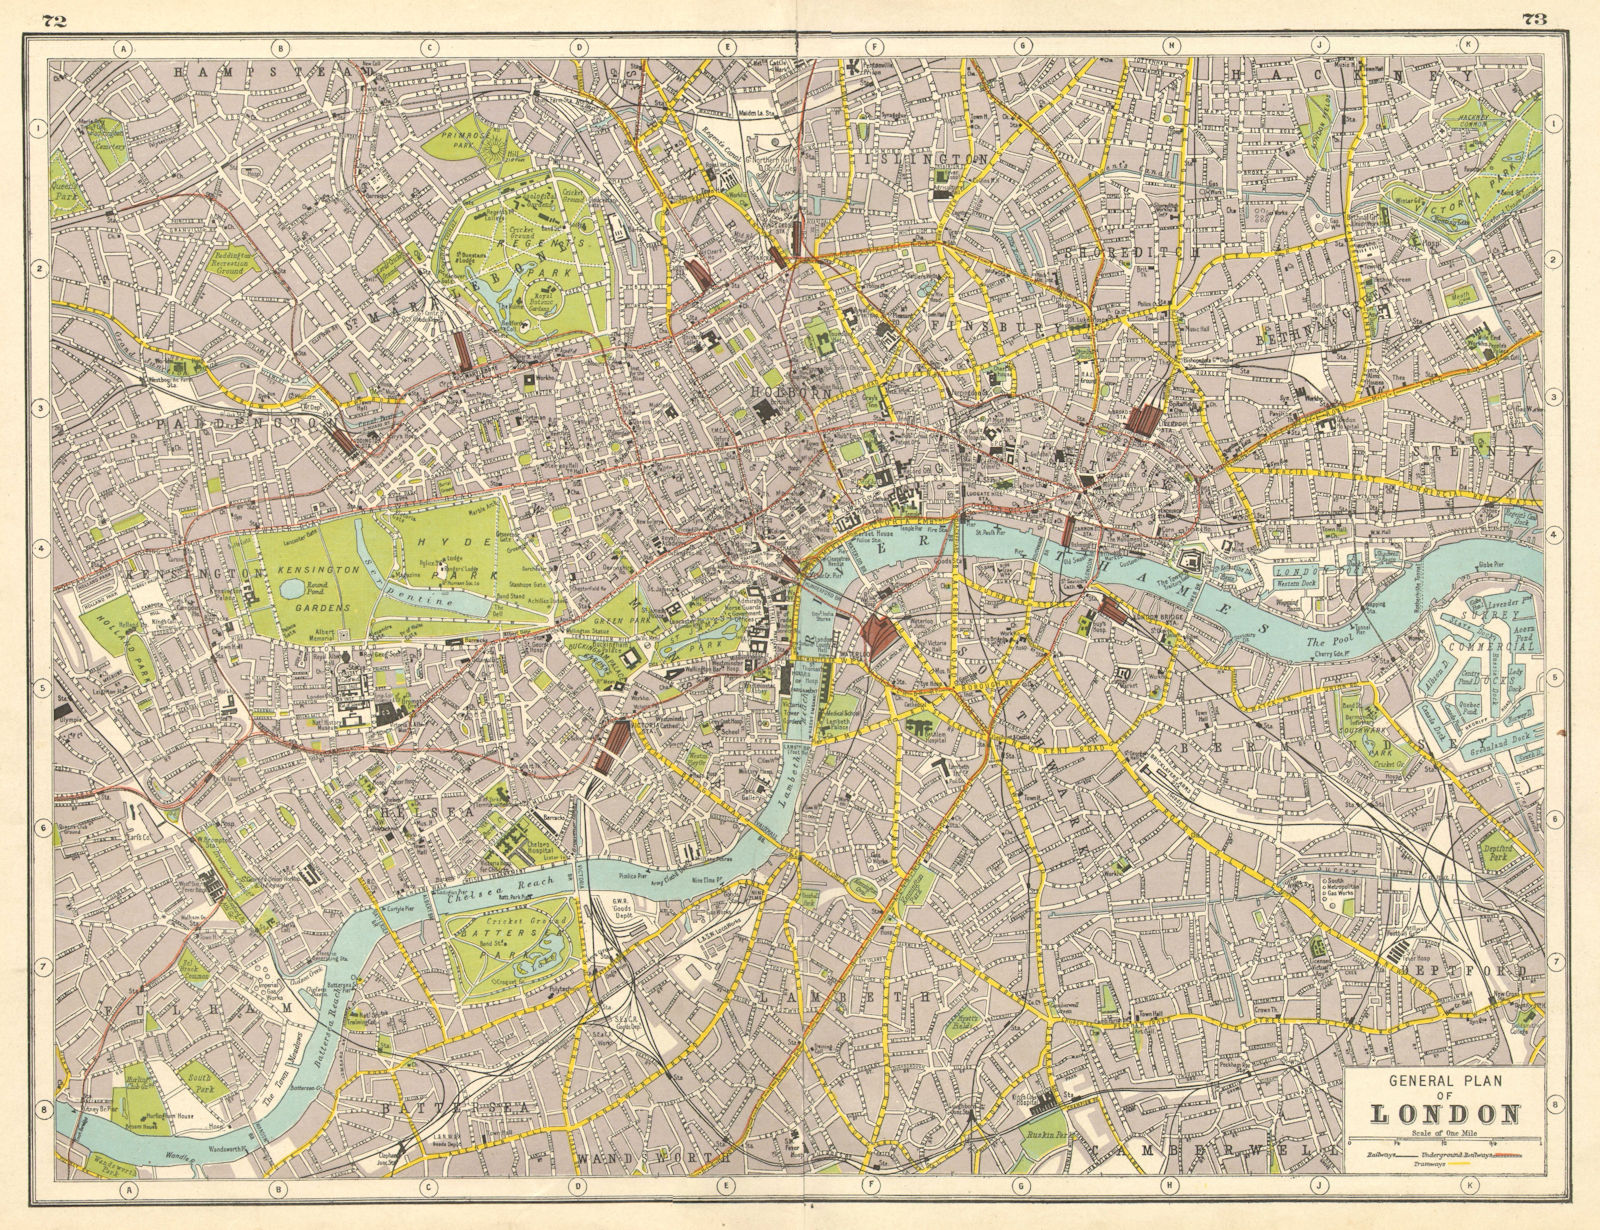 LONDON. Central London plan. HARMSWORTH 1920 old antique map chart